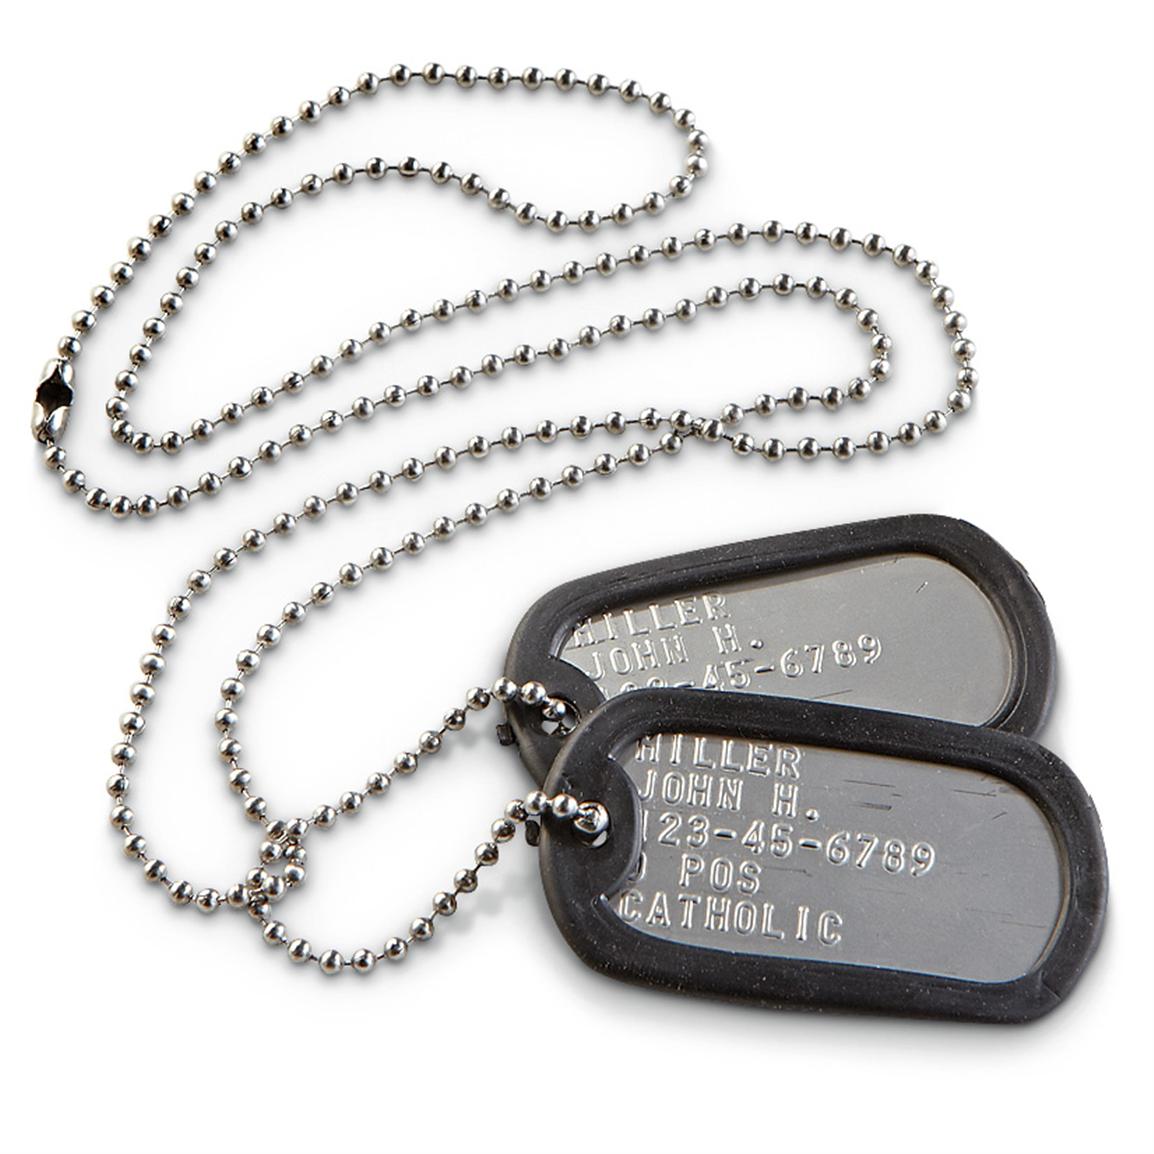 USMC SHINY MILITARY PERSONALIZED DOG TAGS & CHAIN & SILENCERS OFFICIAL GI ARMY 